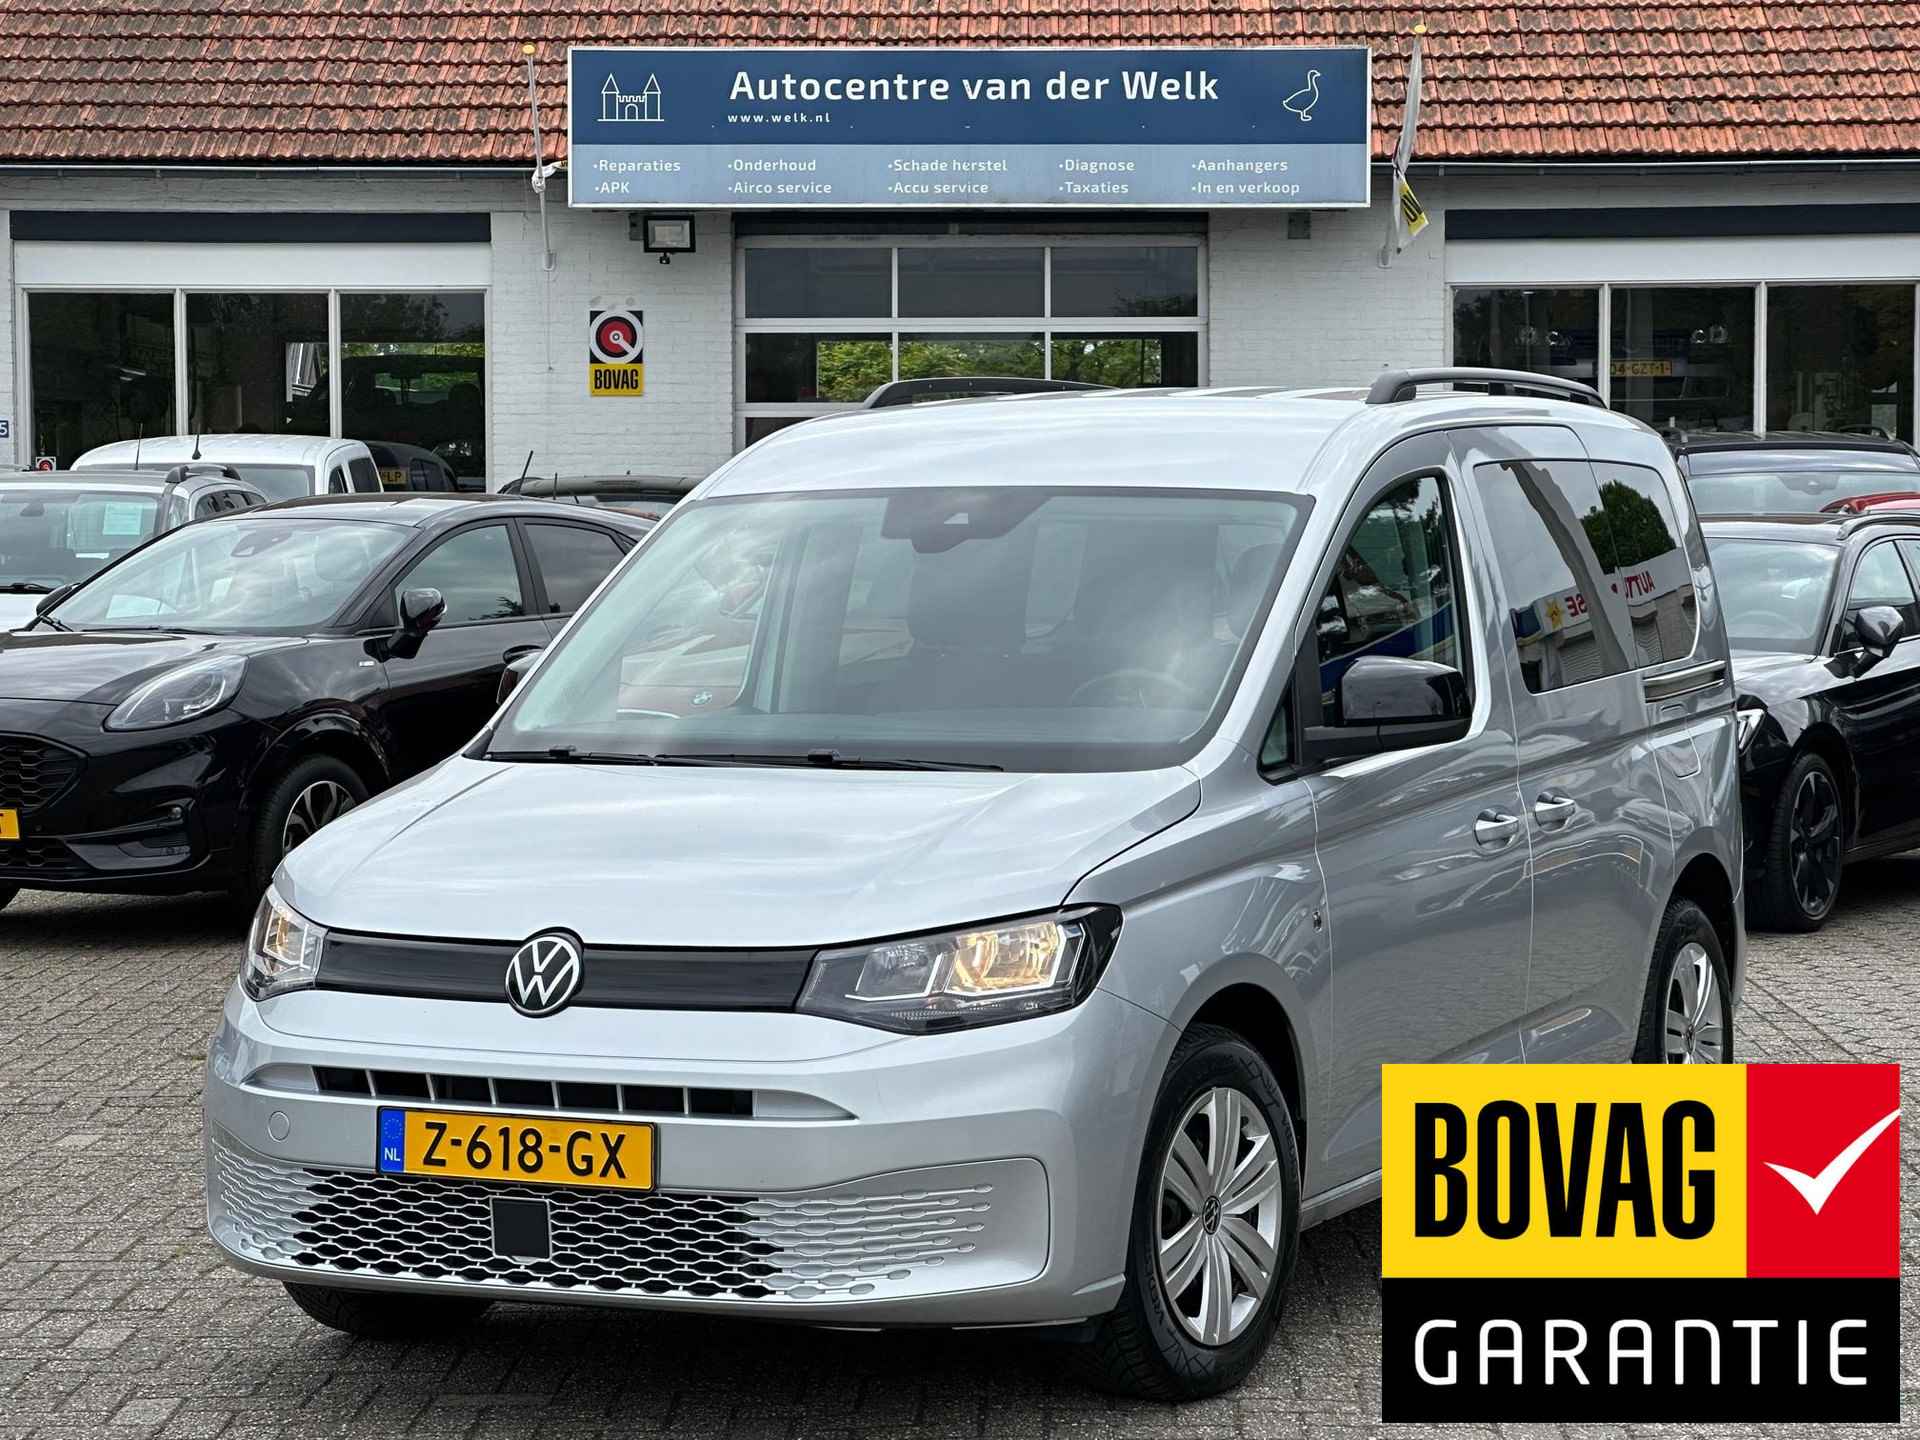 Volkswagen Caddy 1.4 TSI 5p AUTOMAAT! CARPLAY | CRUISE CONTROL | BOVAG!! - 1/30